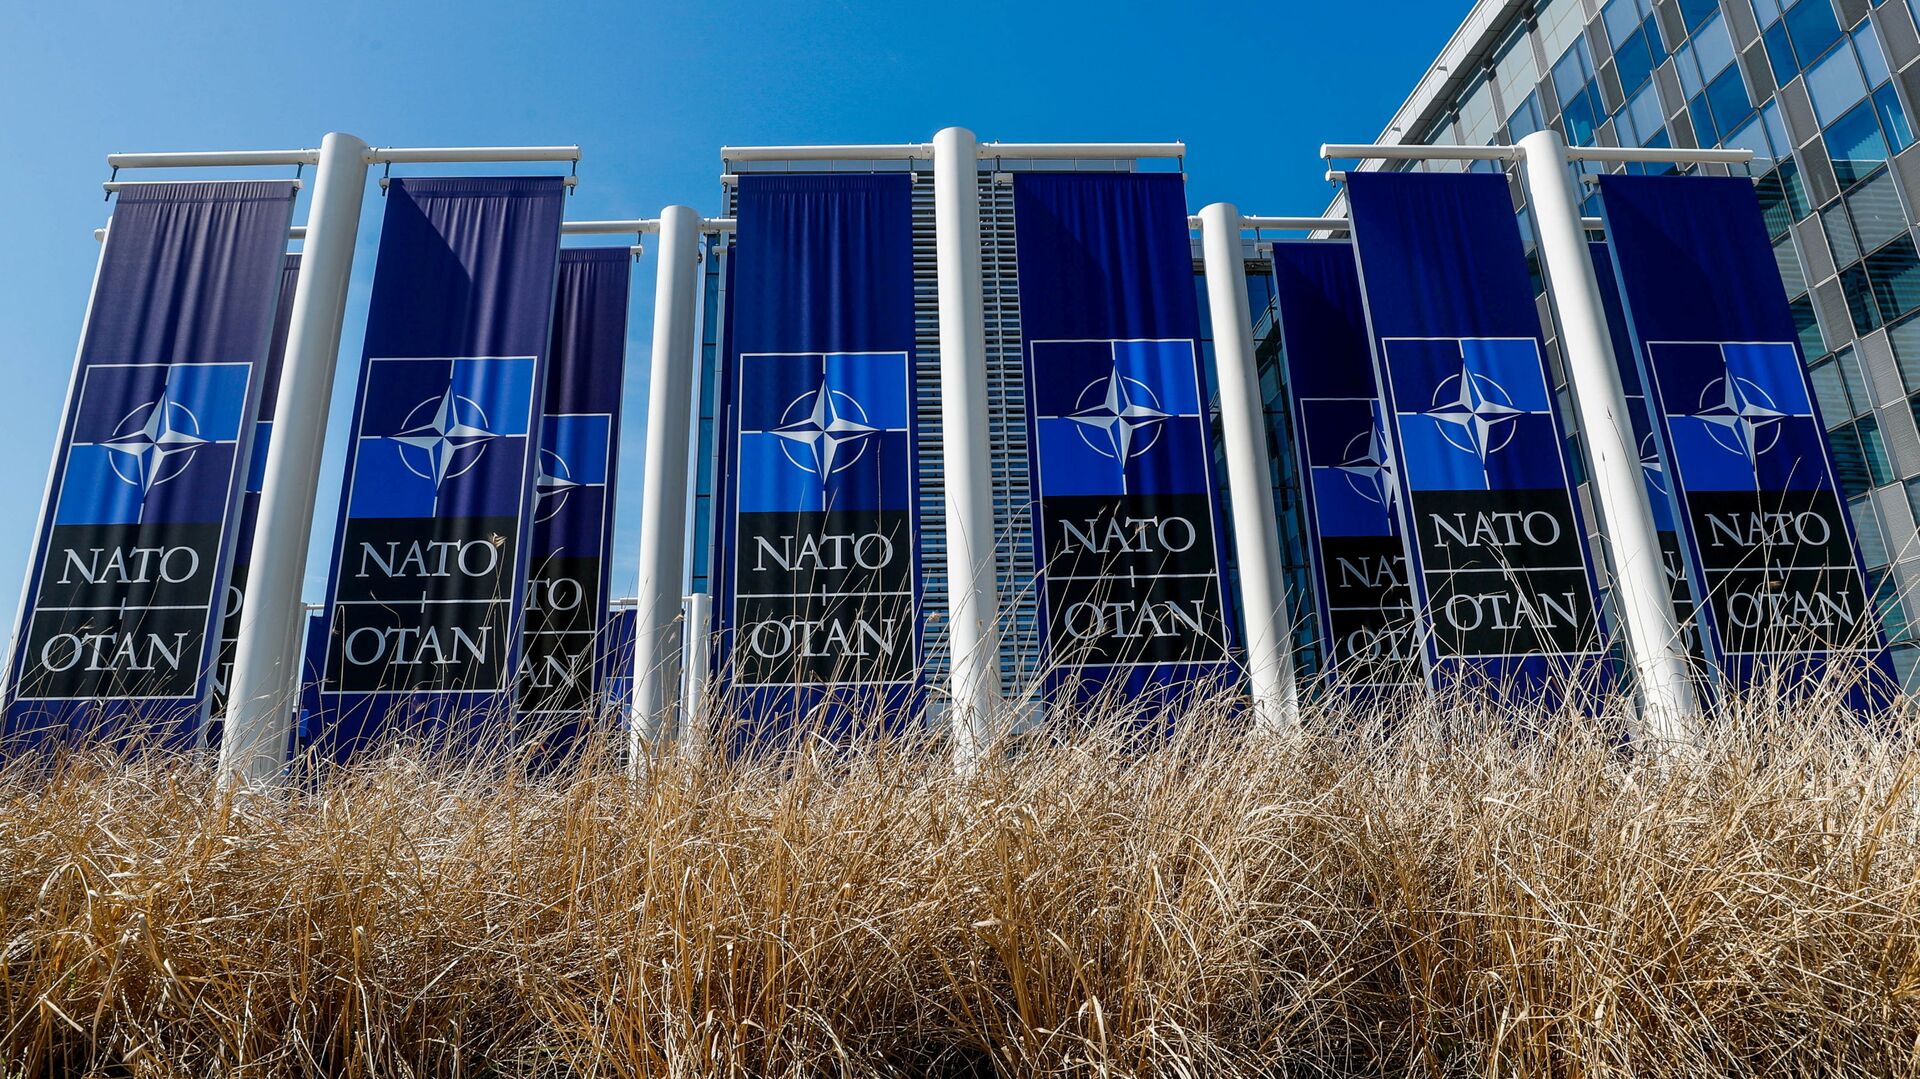 FILE PHOTO: Banners displaying the NATO logo are placed at the entrance of new NATO headquarters during the move to the new building, in Brussels, Belgium April 19, 2018.  REUTERS/Yves Herman/File Photo - Sputnik International, 1920, 06.09.2021